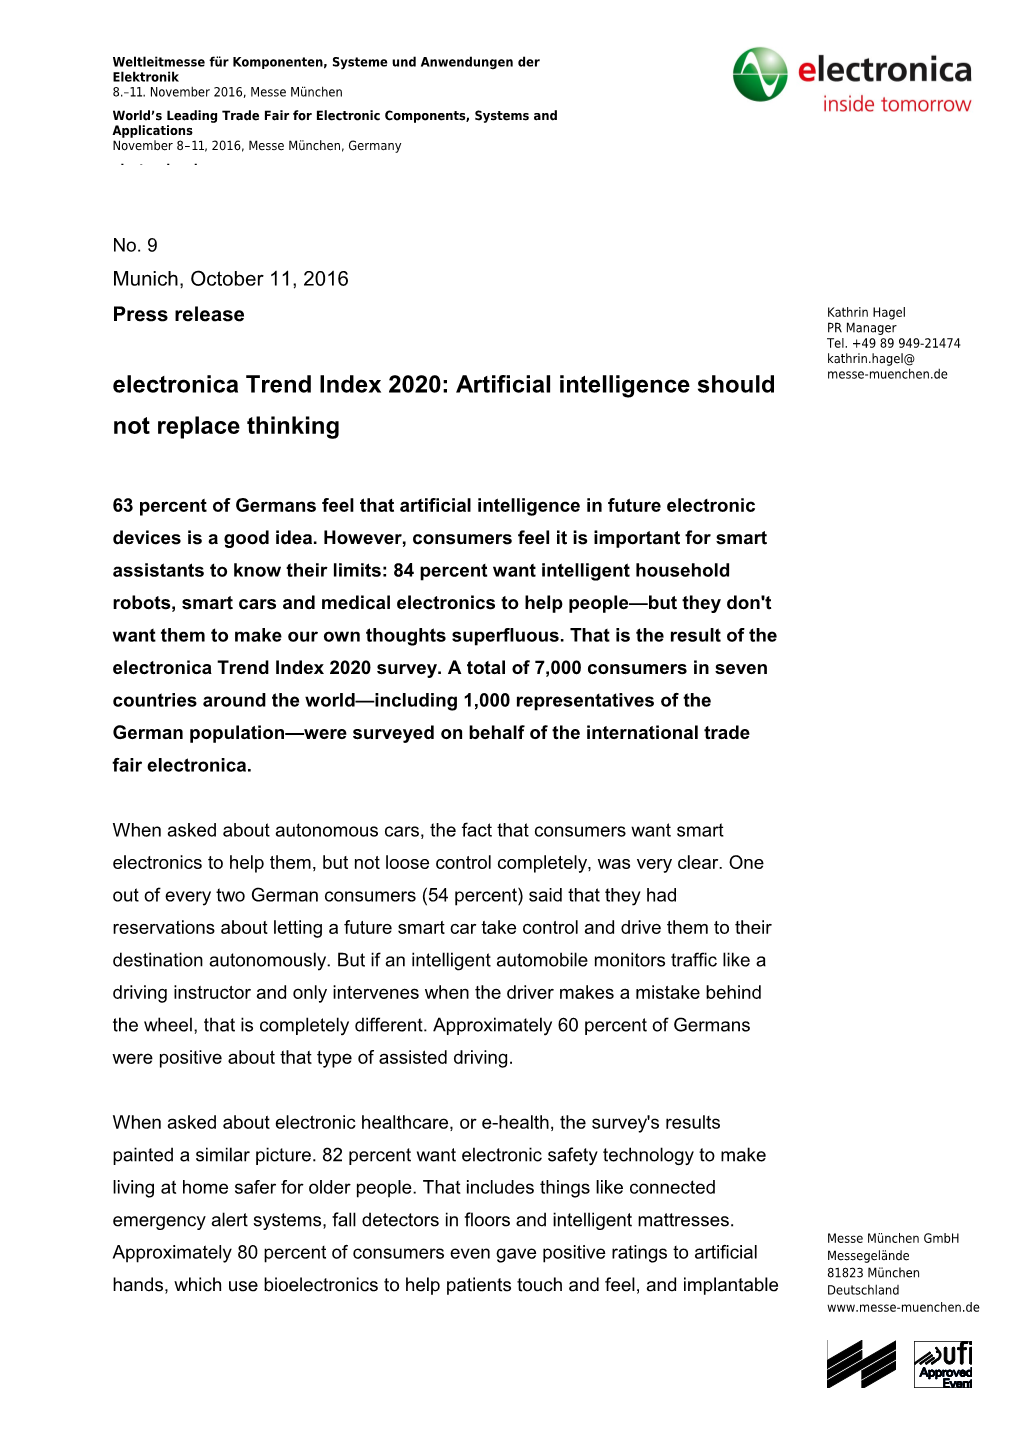 Electronica Trend Index 2020: Artificial Intelligence Should Not Replace Thinking